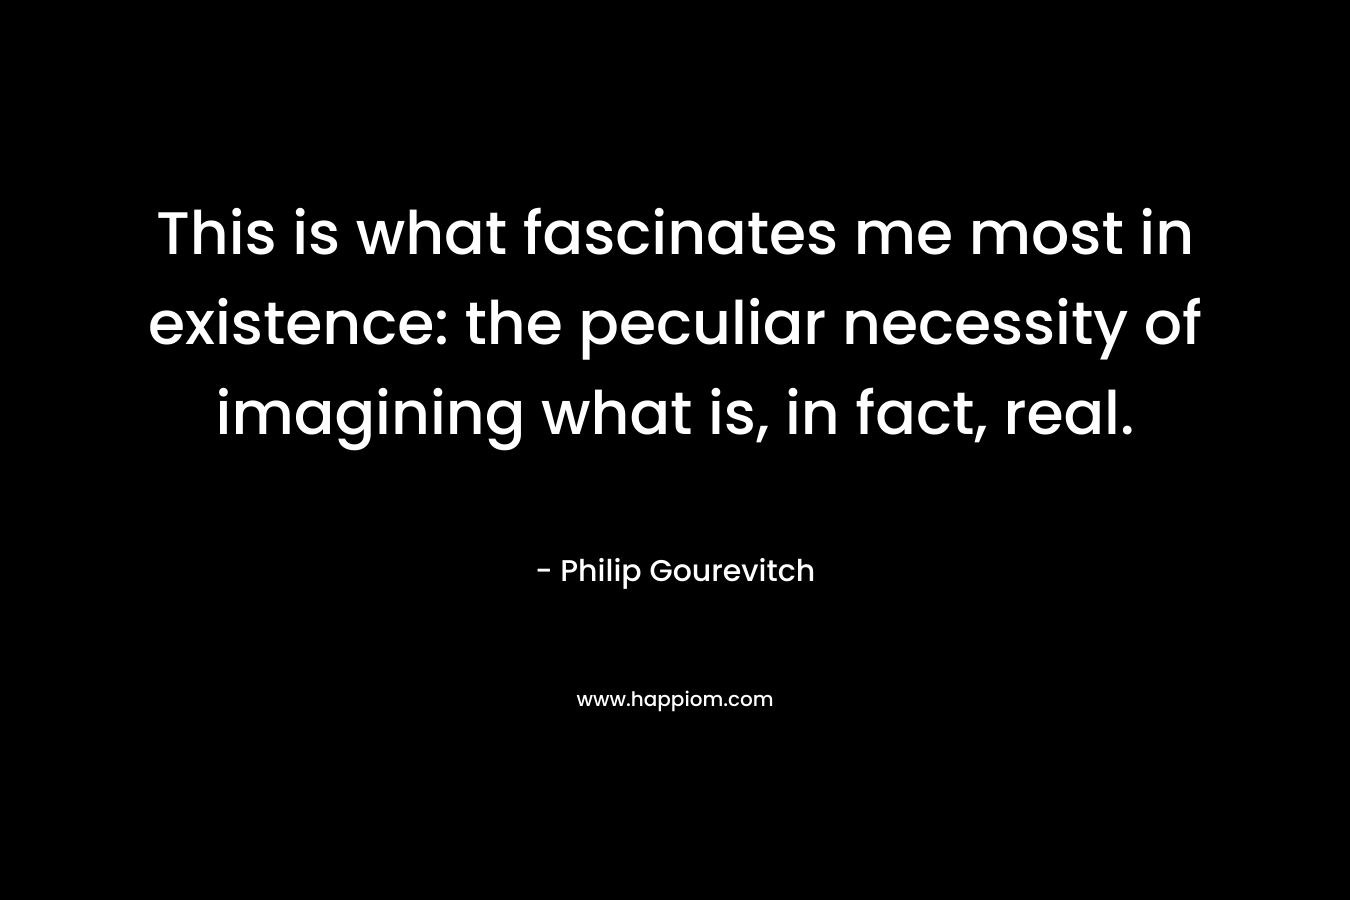 This is what fascinates me most in existence: the peculiar necessity of imagining what is, in fact, real. – Philip Gourevitch